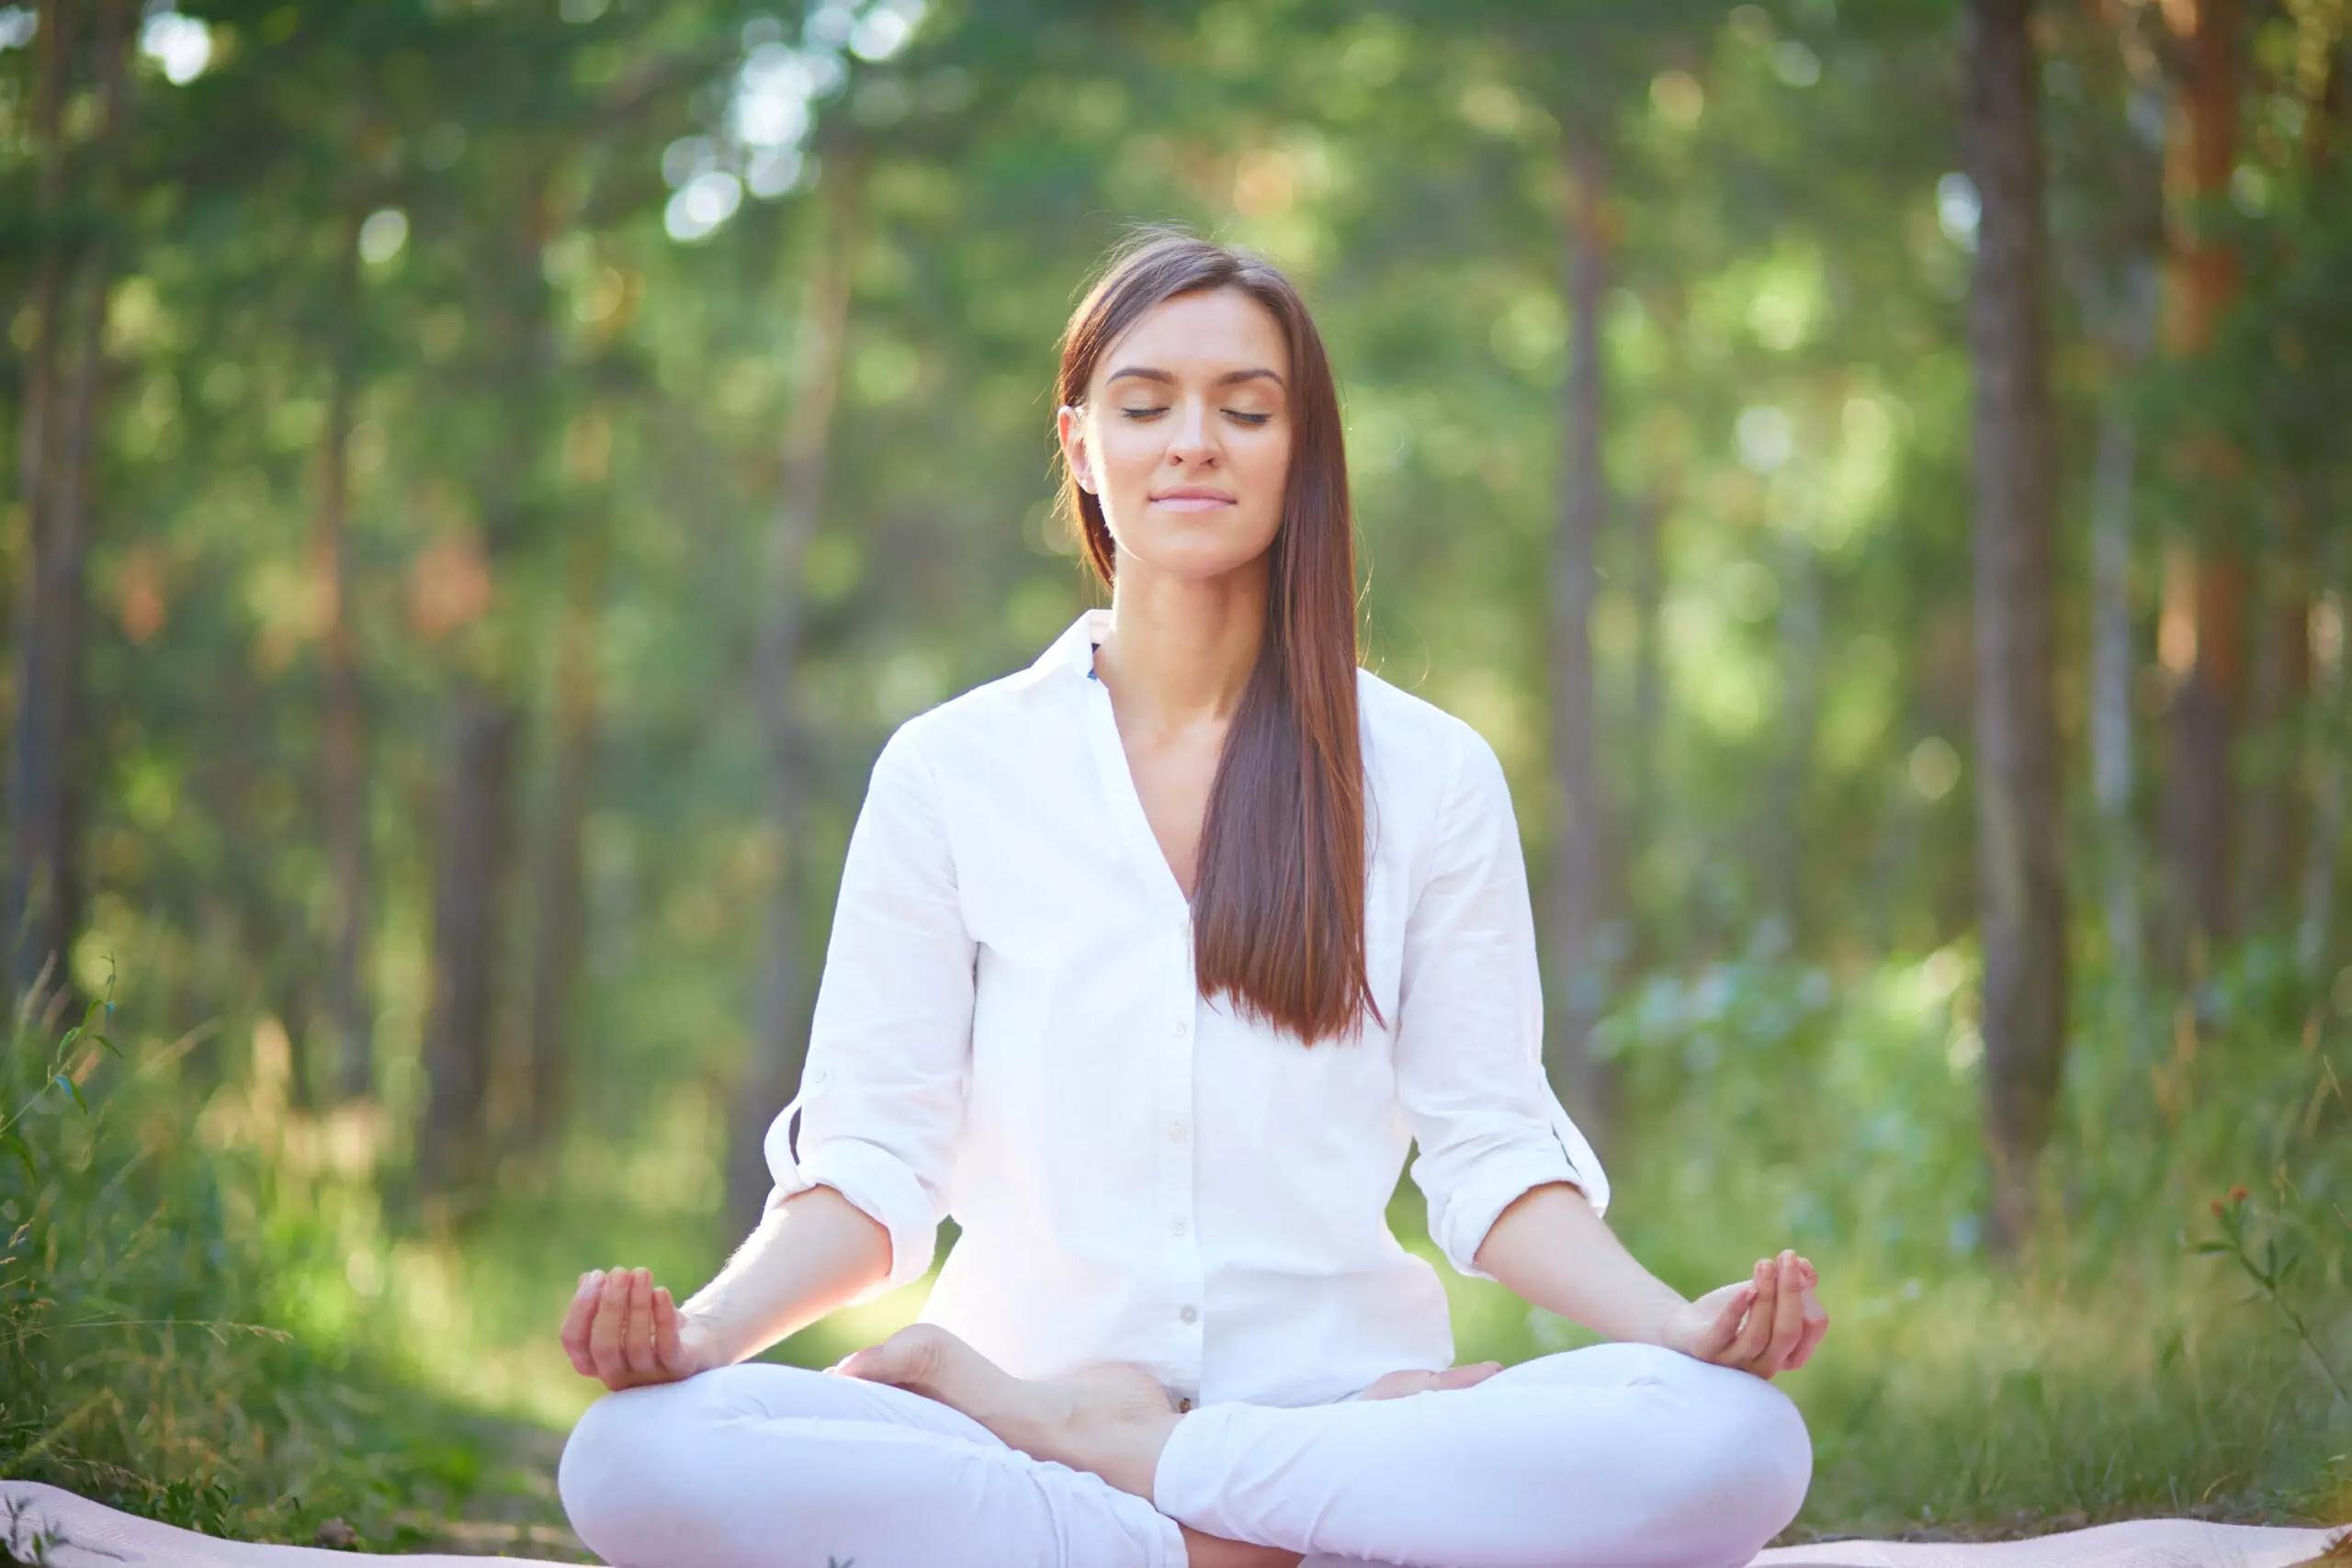 Woman meditating peacefully in forest setting.